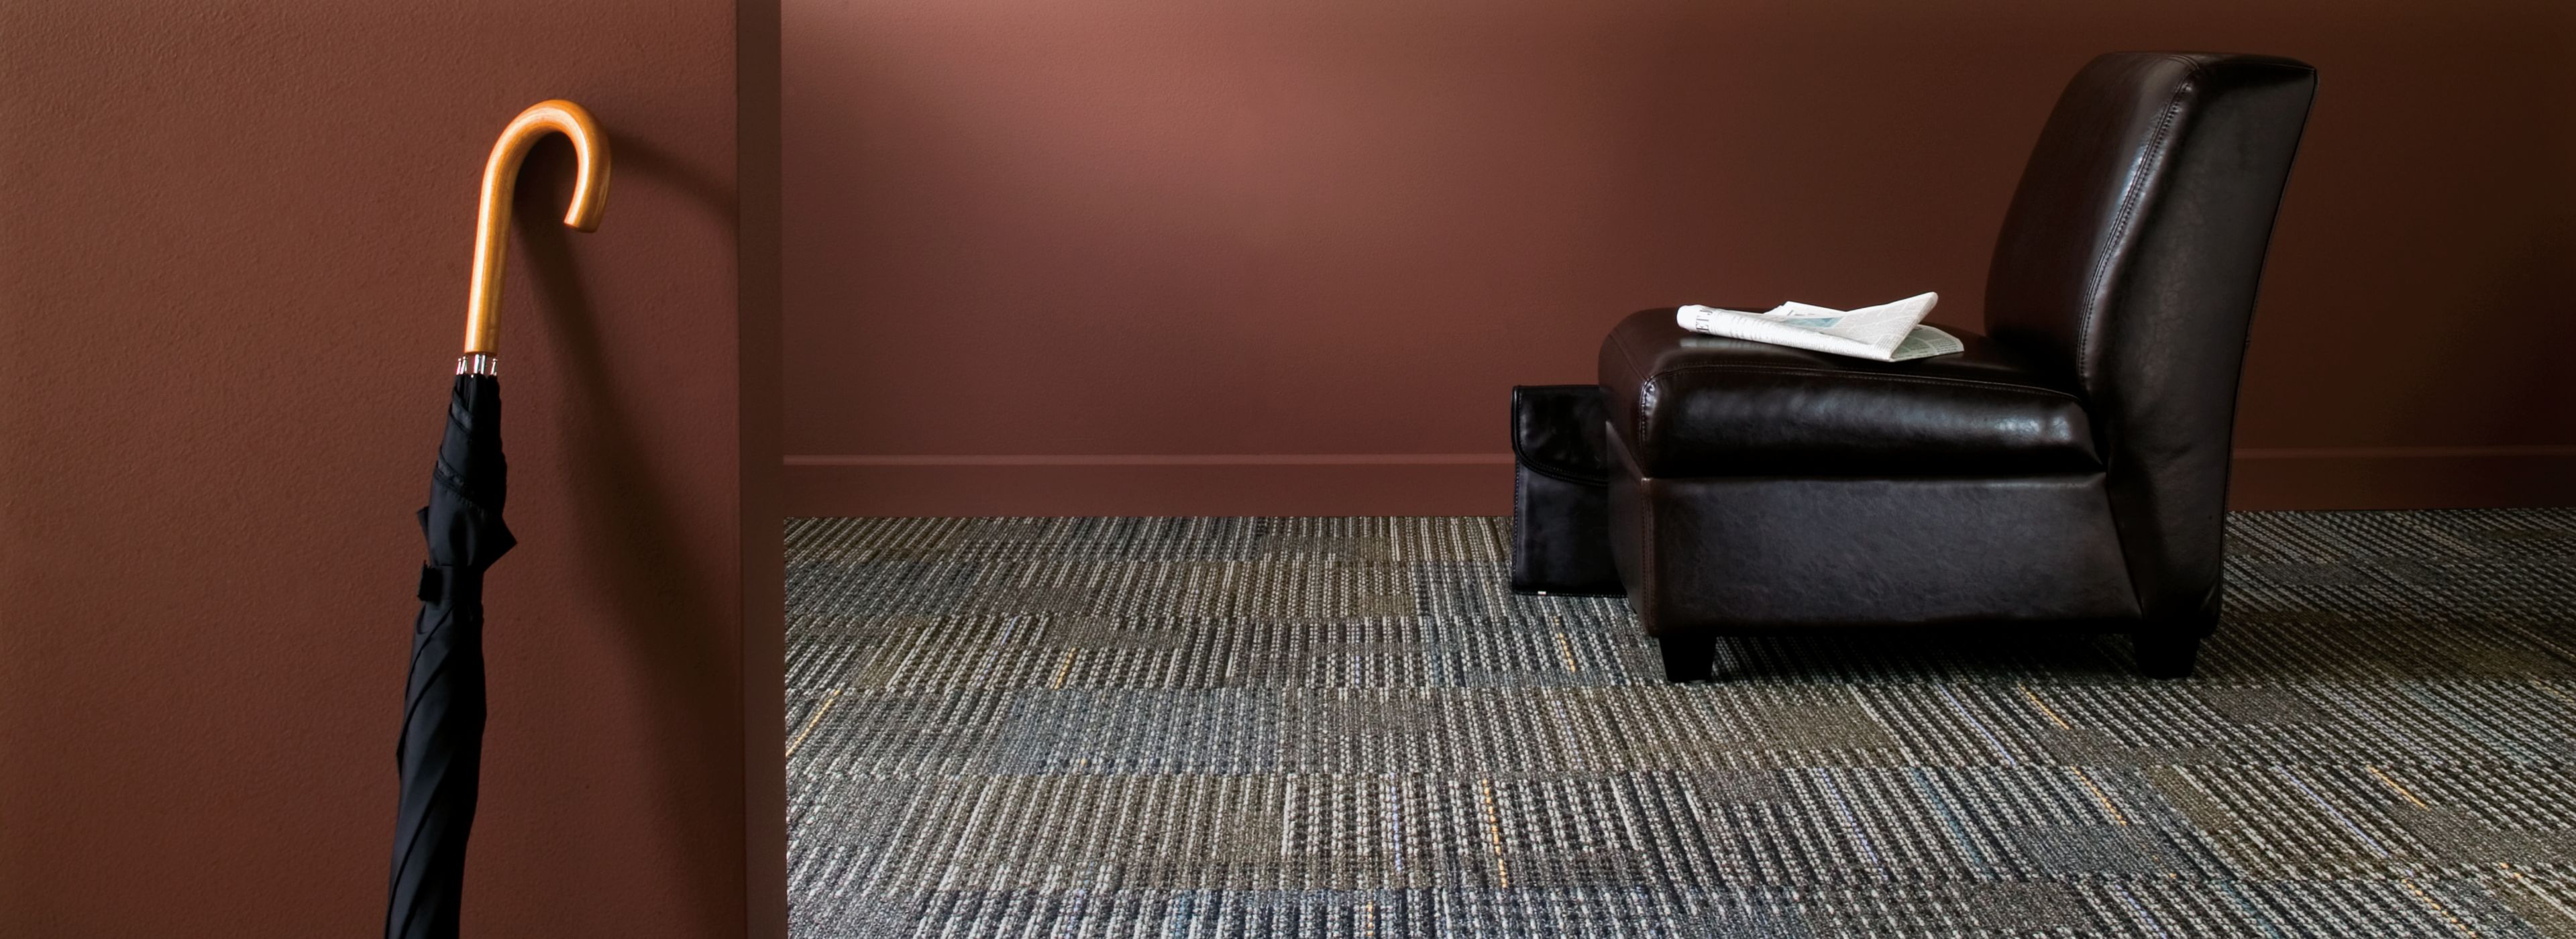 Interface Cotswold II carpet tile with black chair and umbrella image number 1